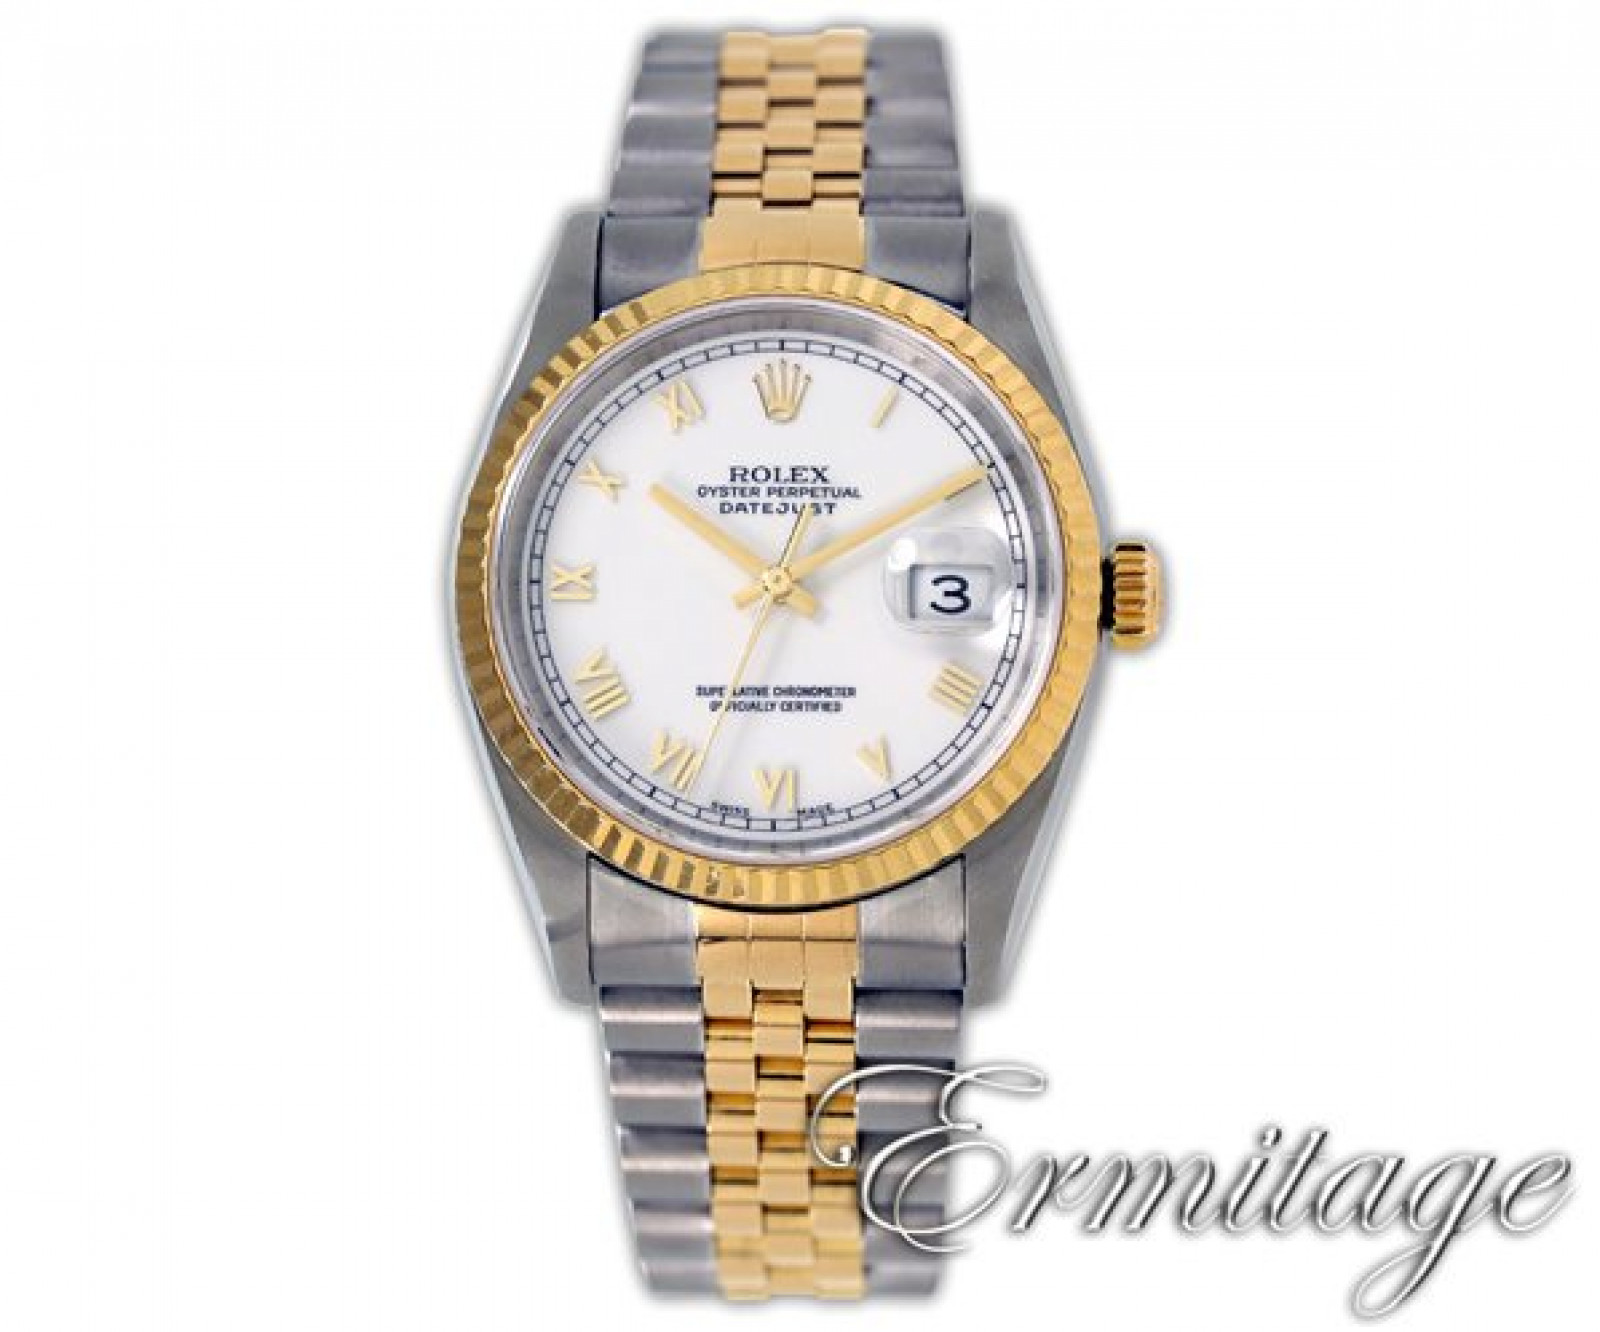 Preowned Rolex Datejust 16233